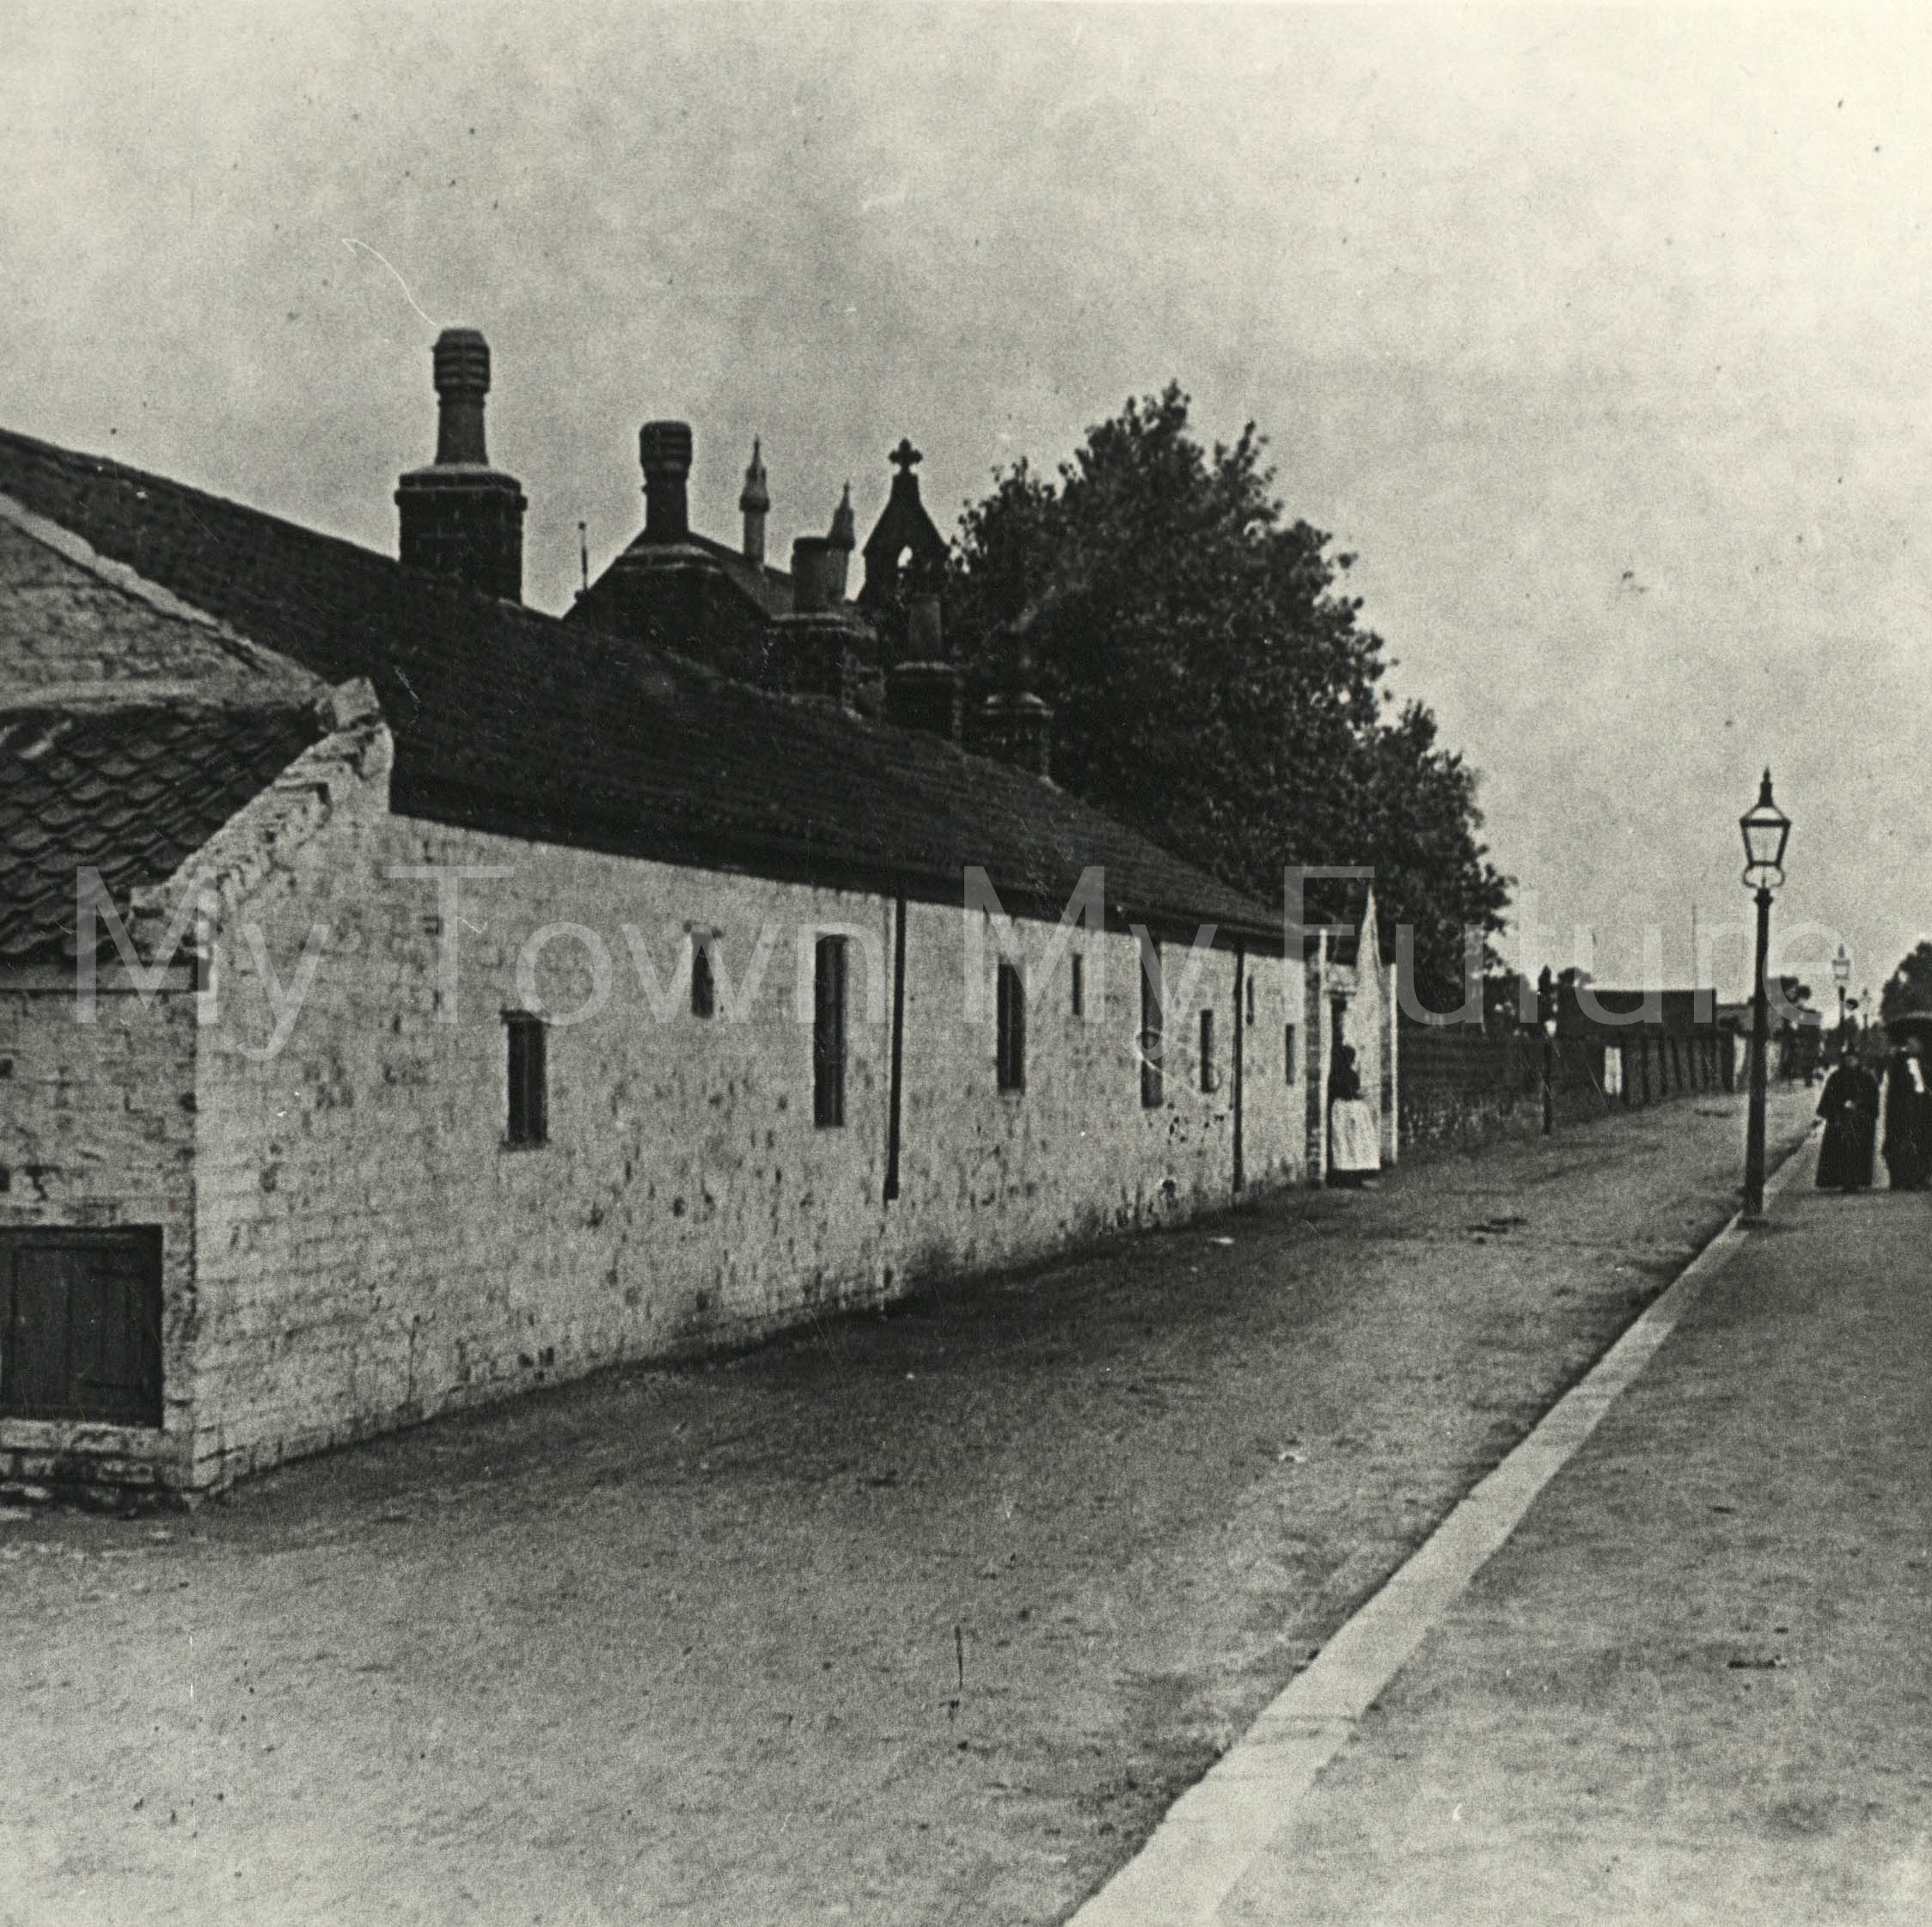 White Cottages, St Barnabas Road, Linthorpe, Middlesbrough. c.1900.